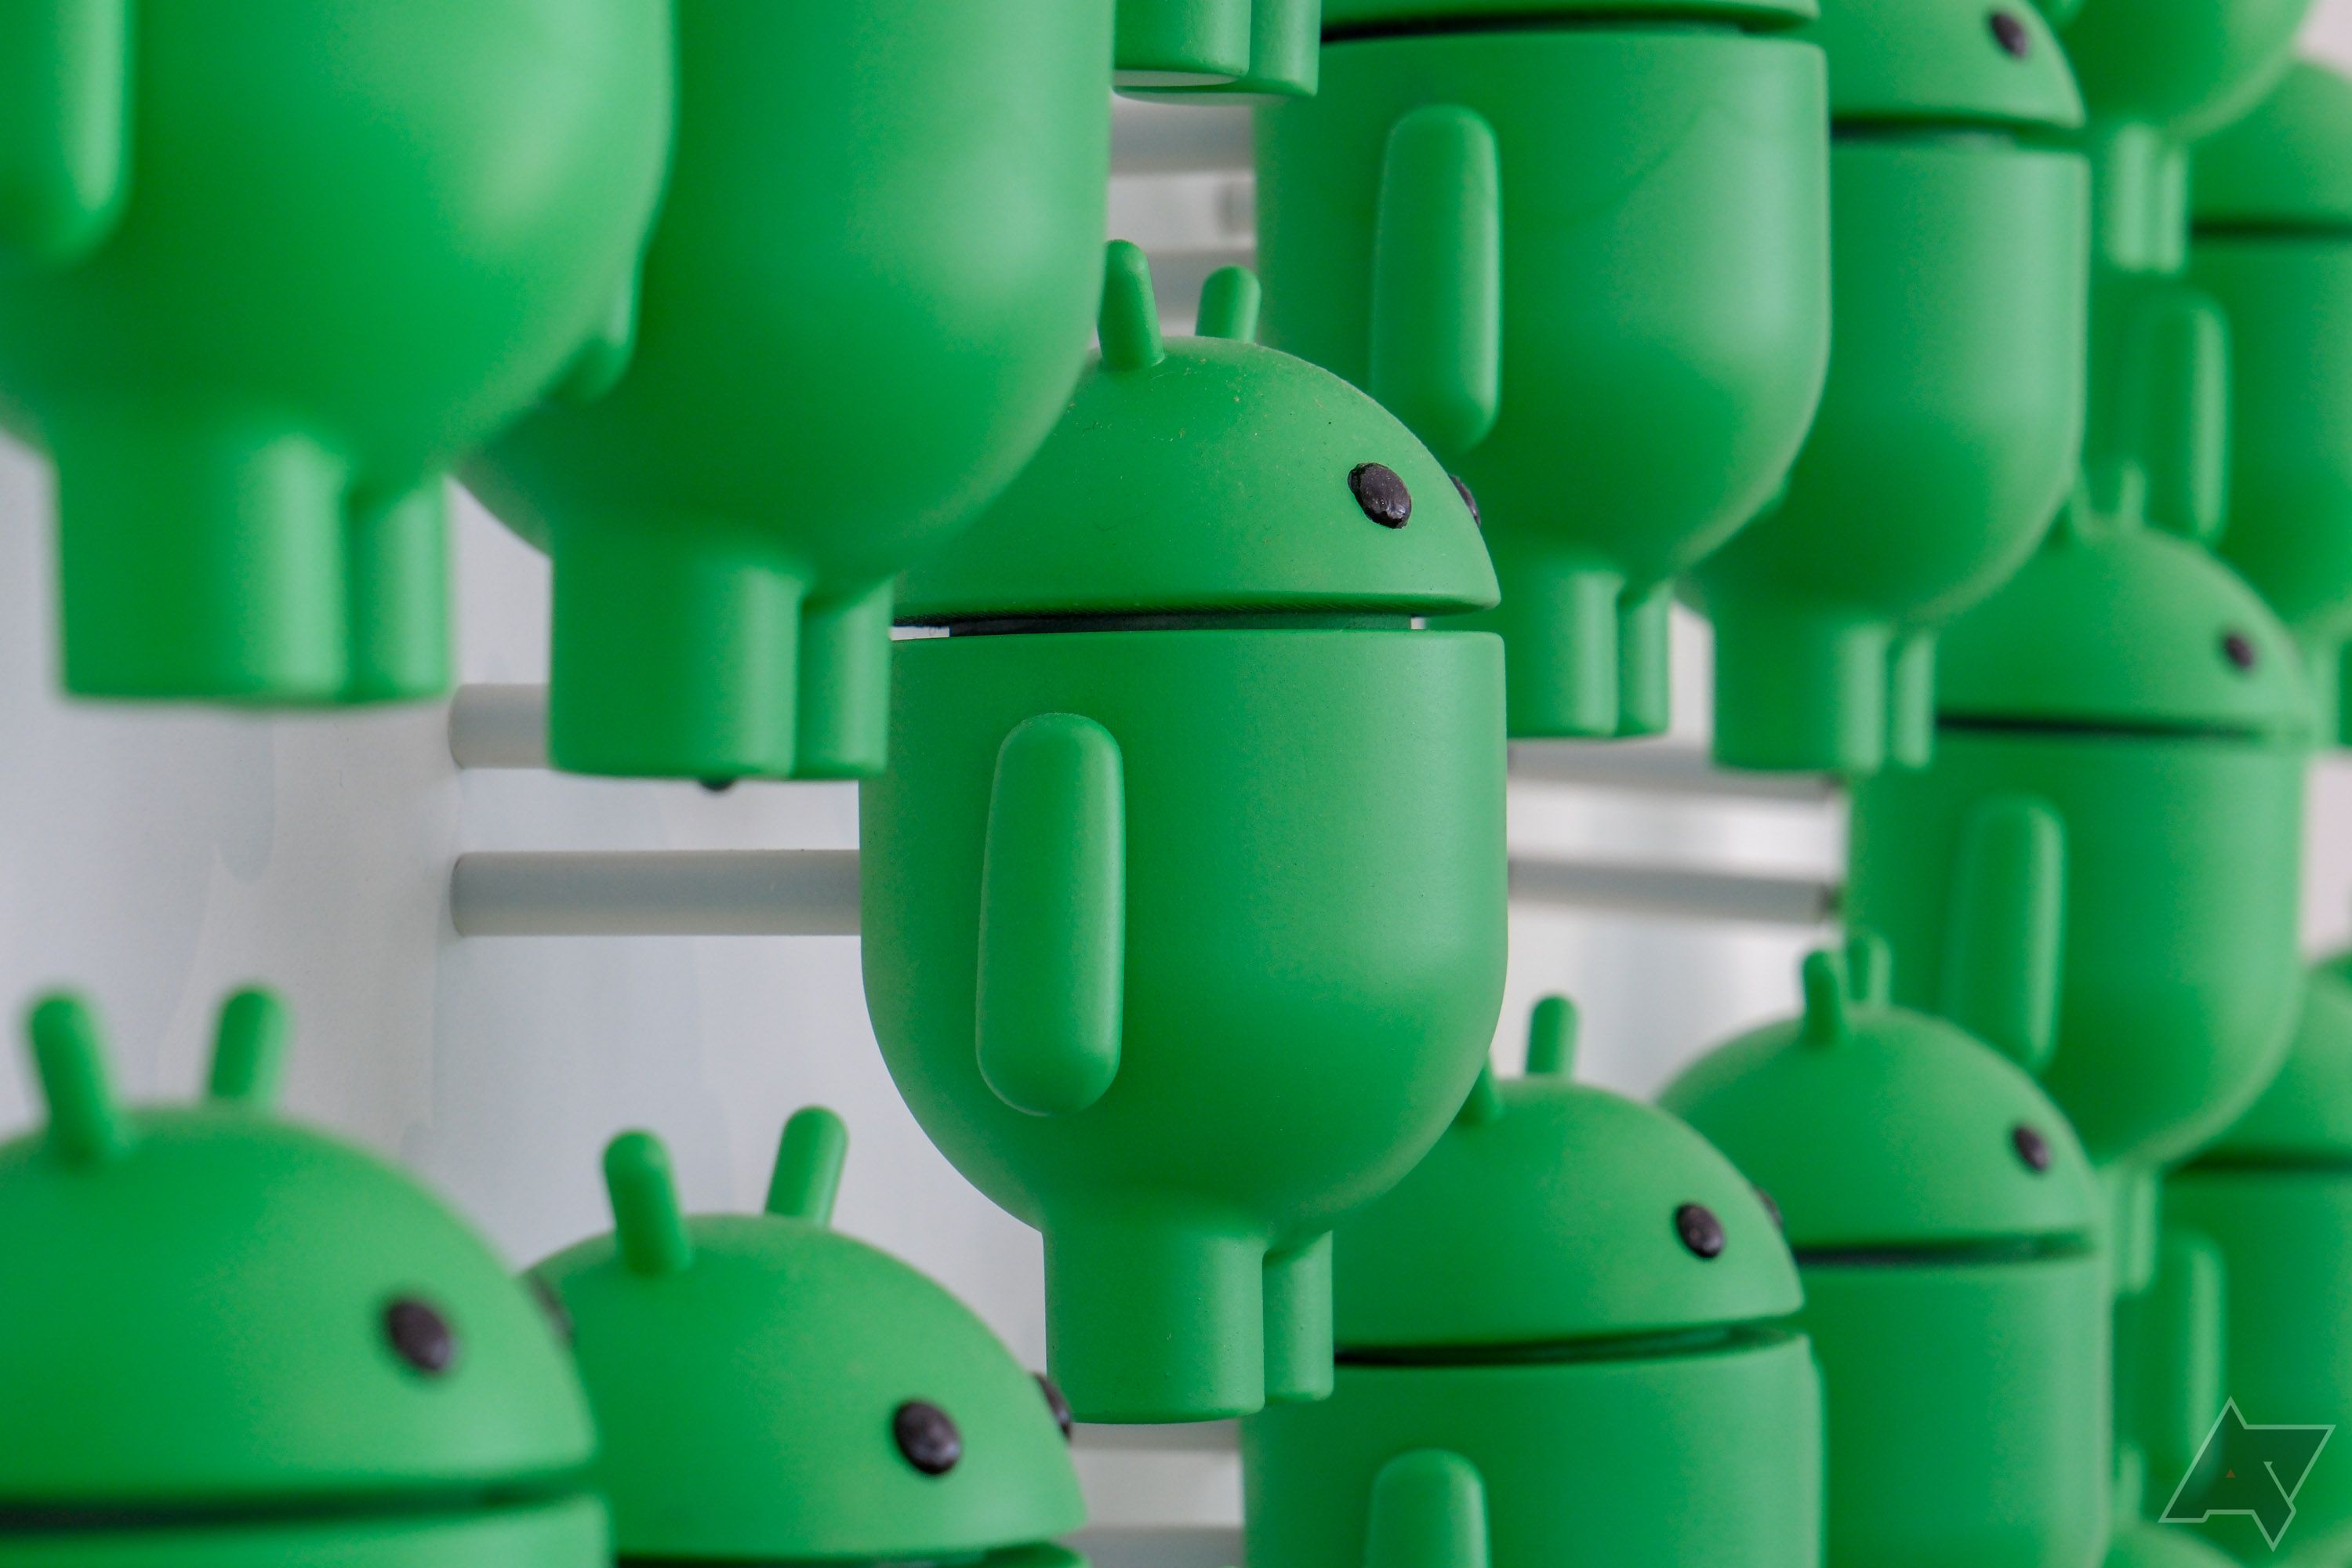 Several green Android mascots attached to a wall